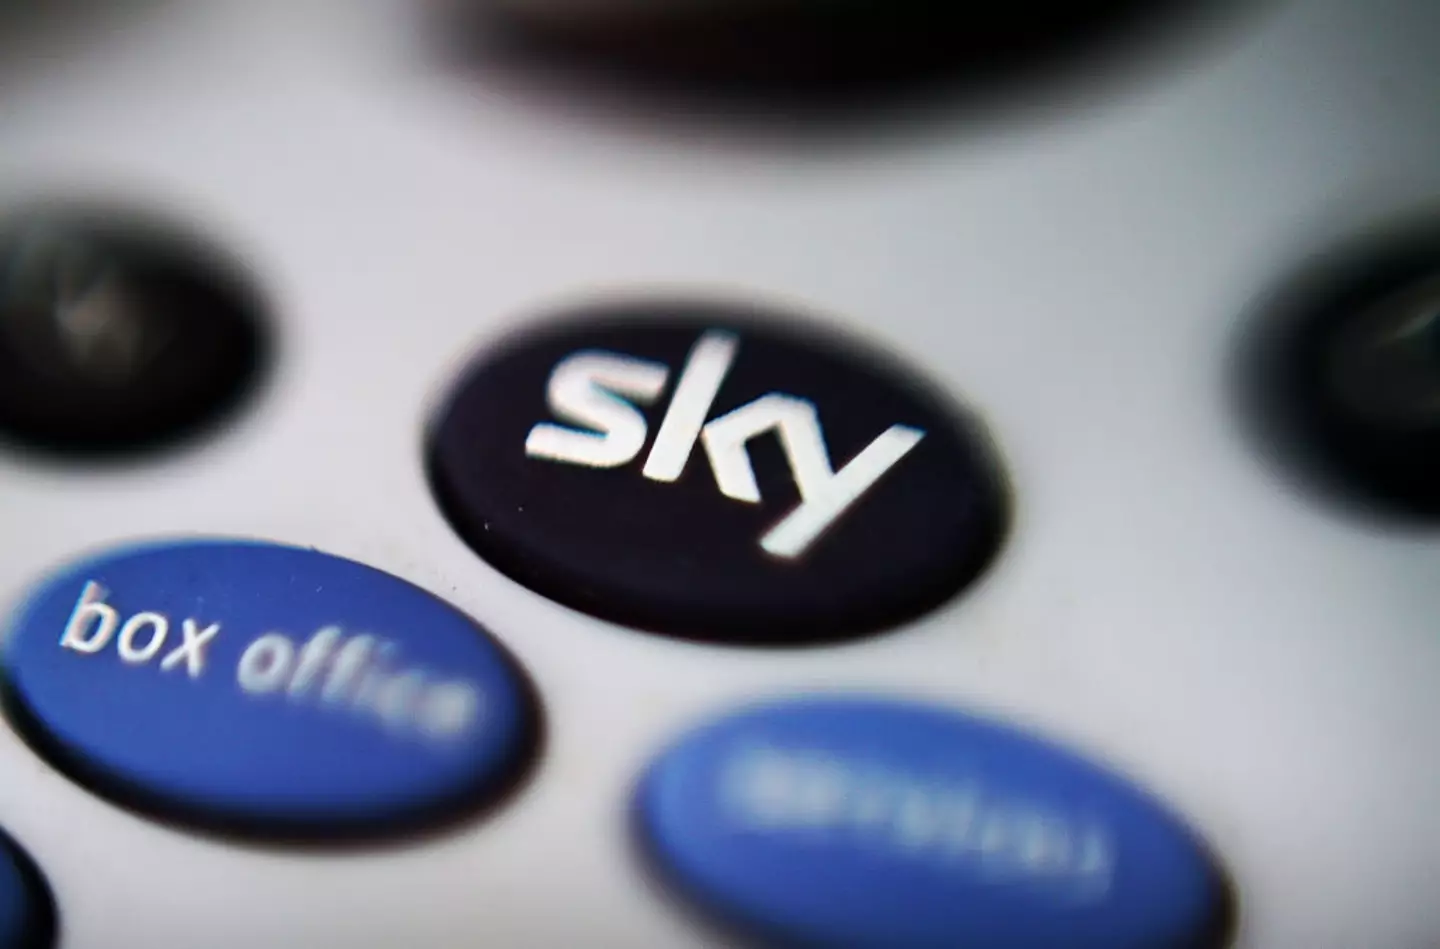 MP Jamie Stone reckons Sky should let everyone watch it for free.